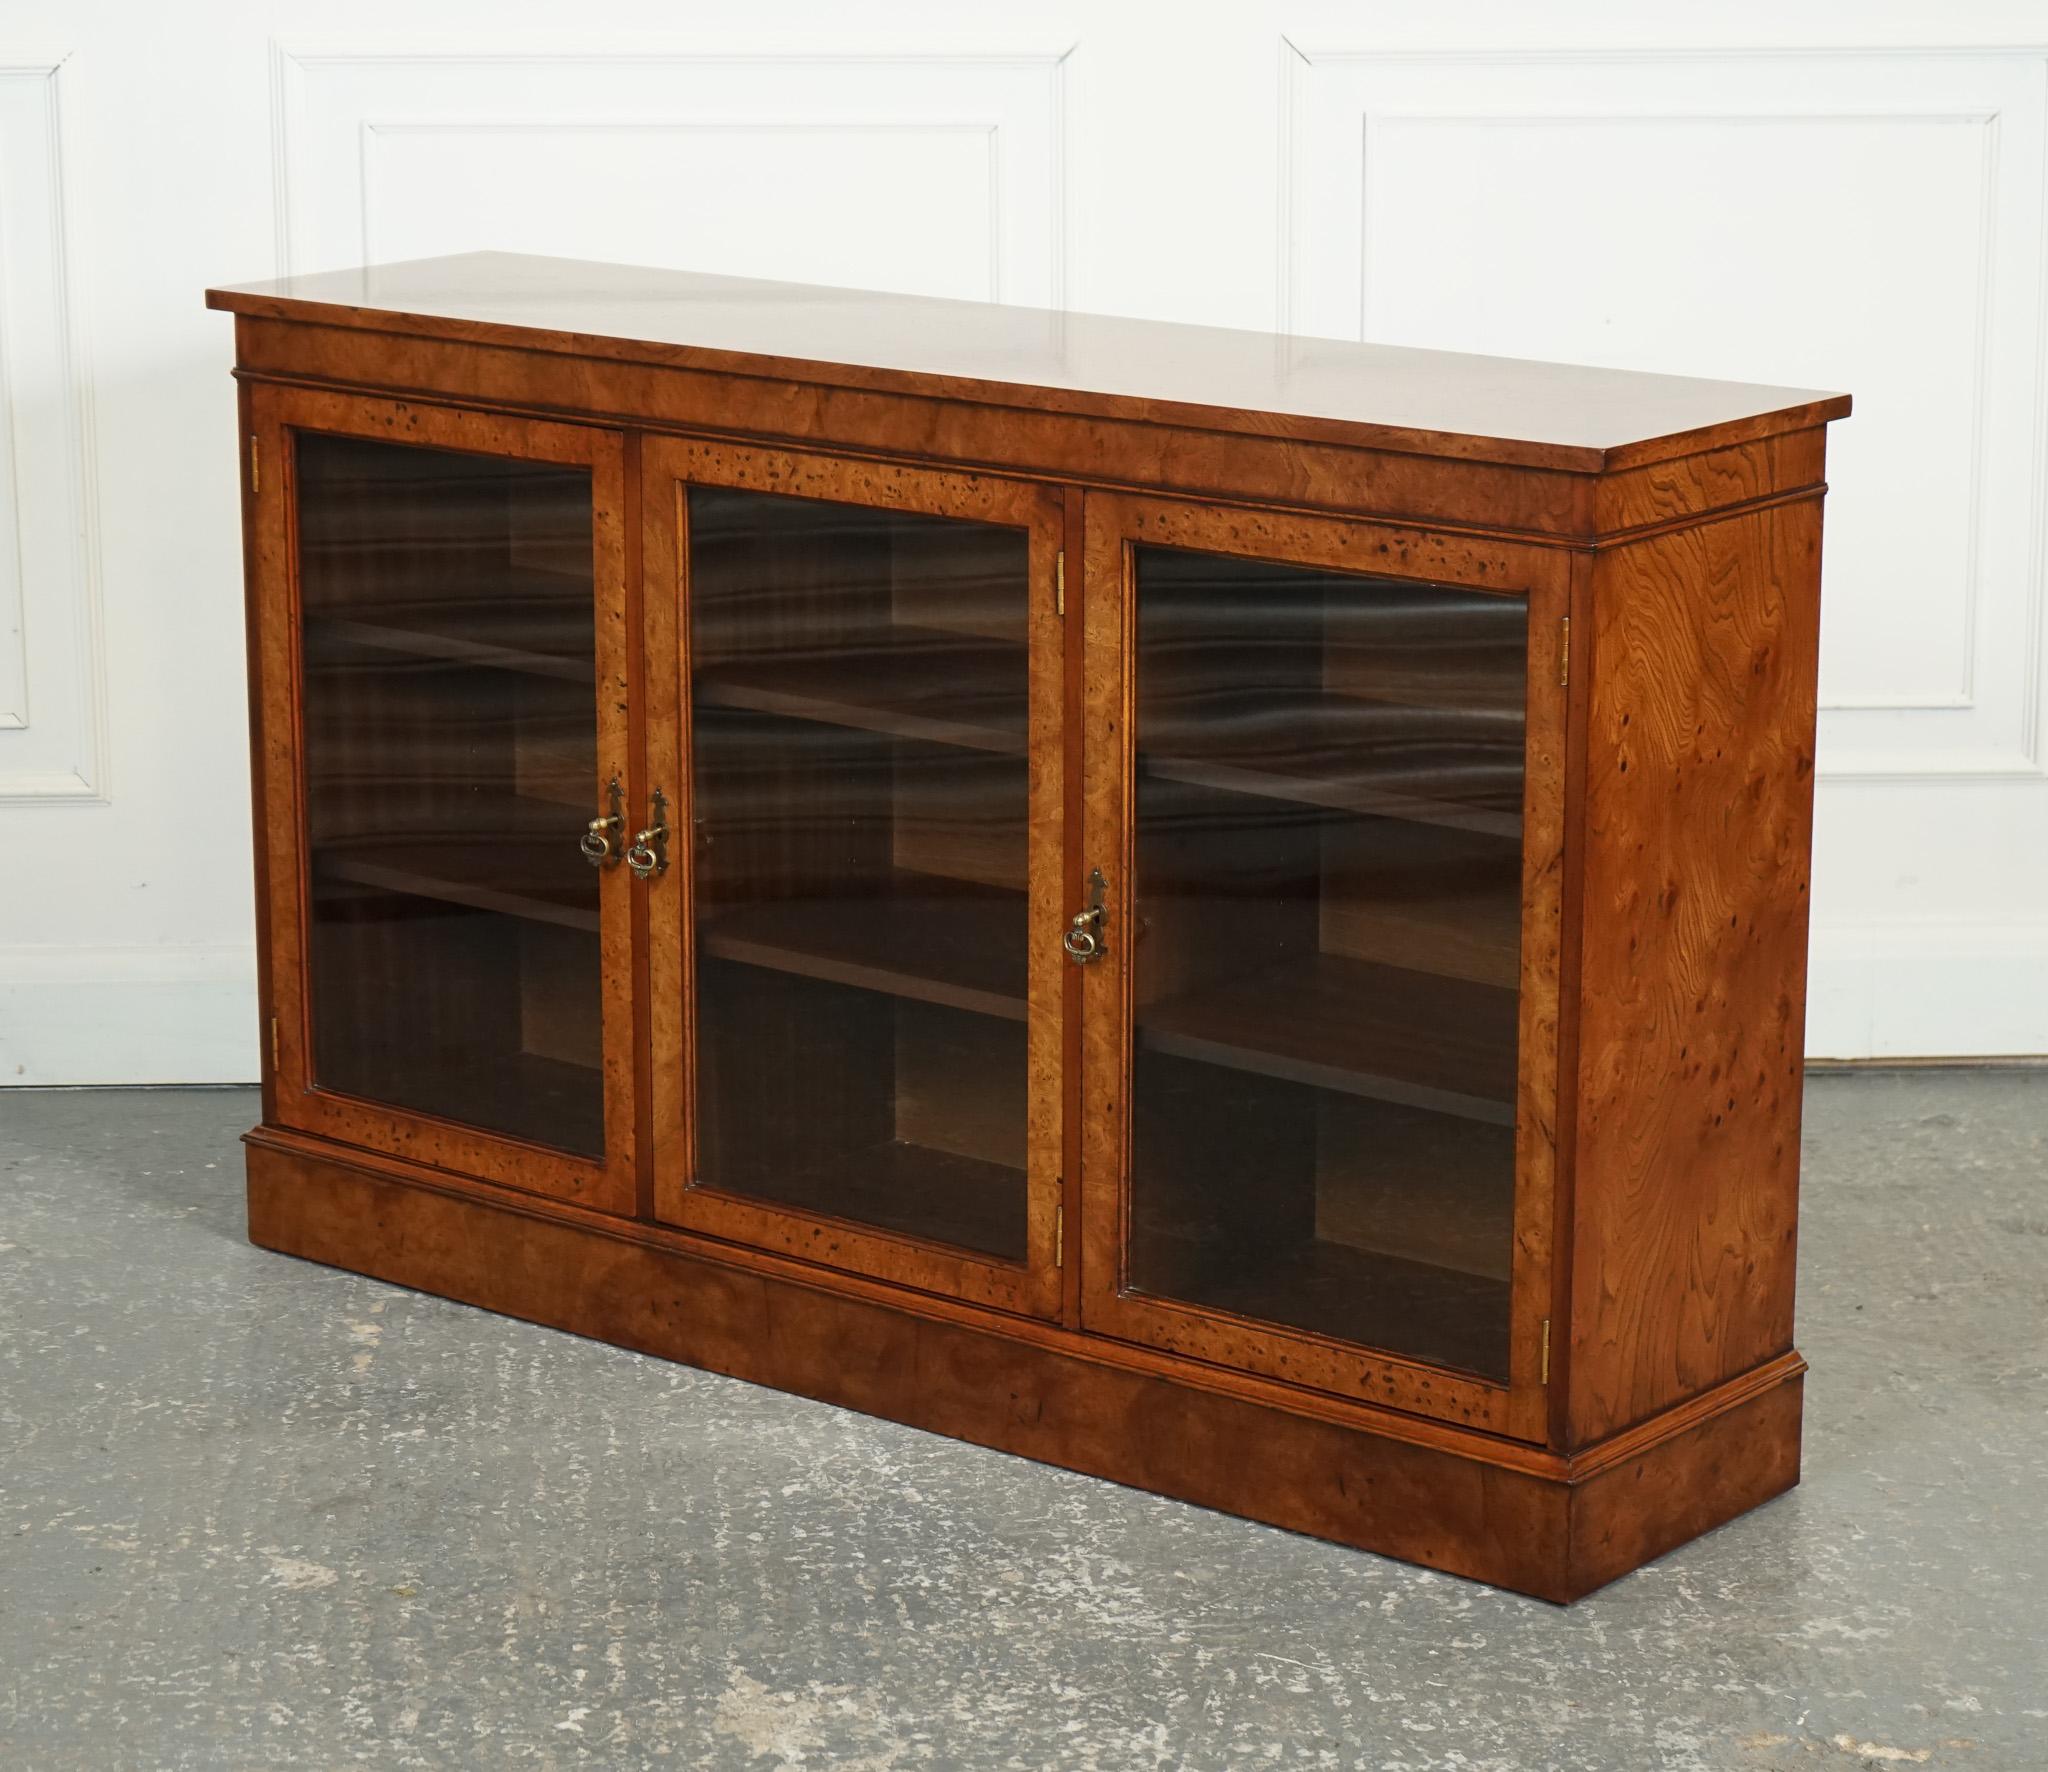 

We are delighted to offer for sale this Gorgeous Burr Walnut Bookcase.

A gorgeous burr walnut glazed bookcase display cabinet is a true showstopper that effortlessly blends functionality with exquisite craftsmanship and aesthetic appeal. This